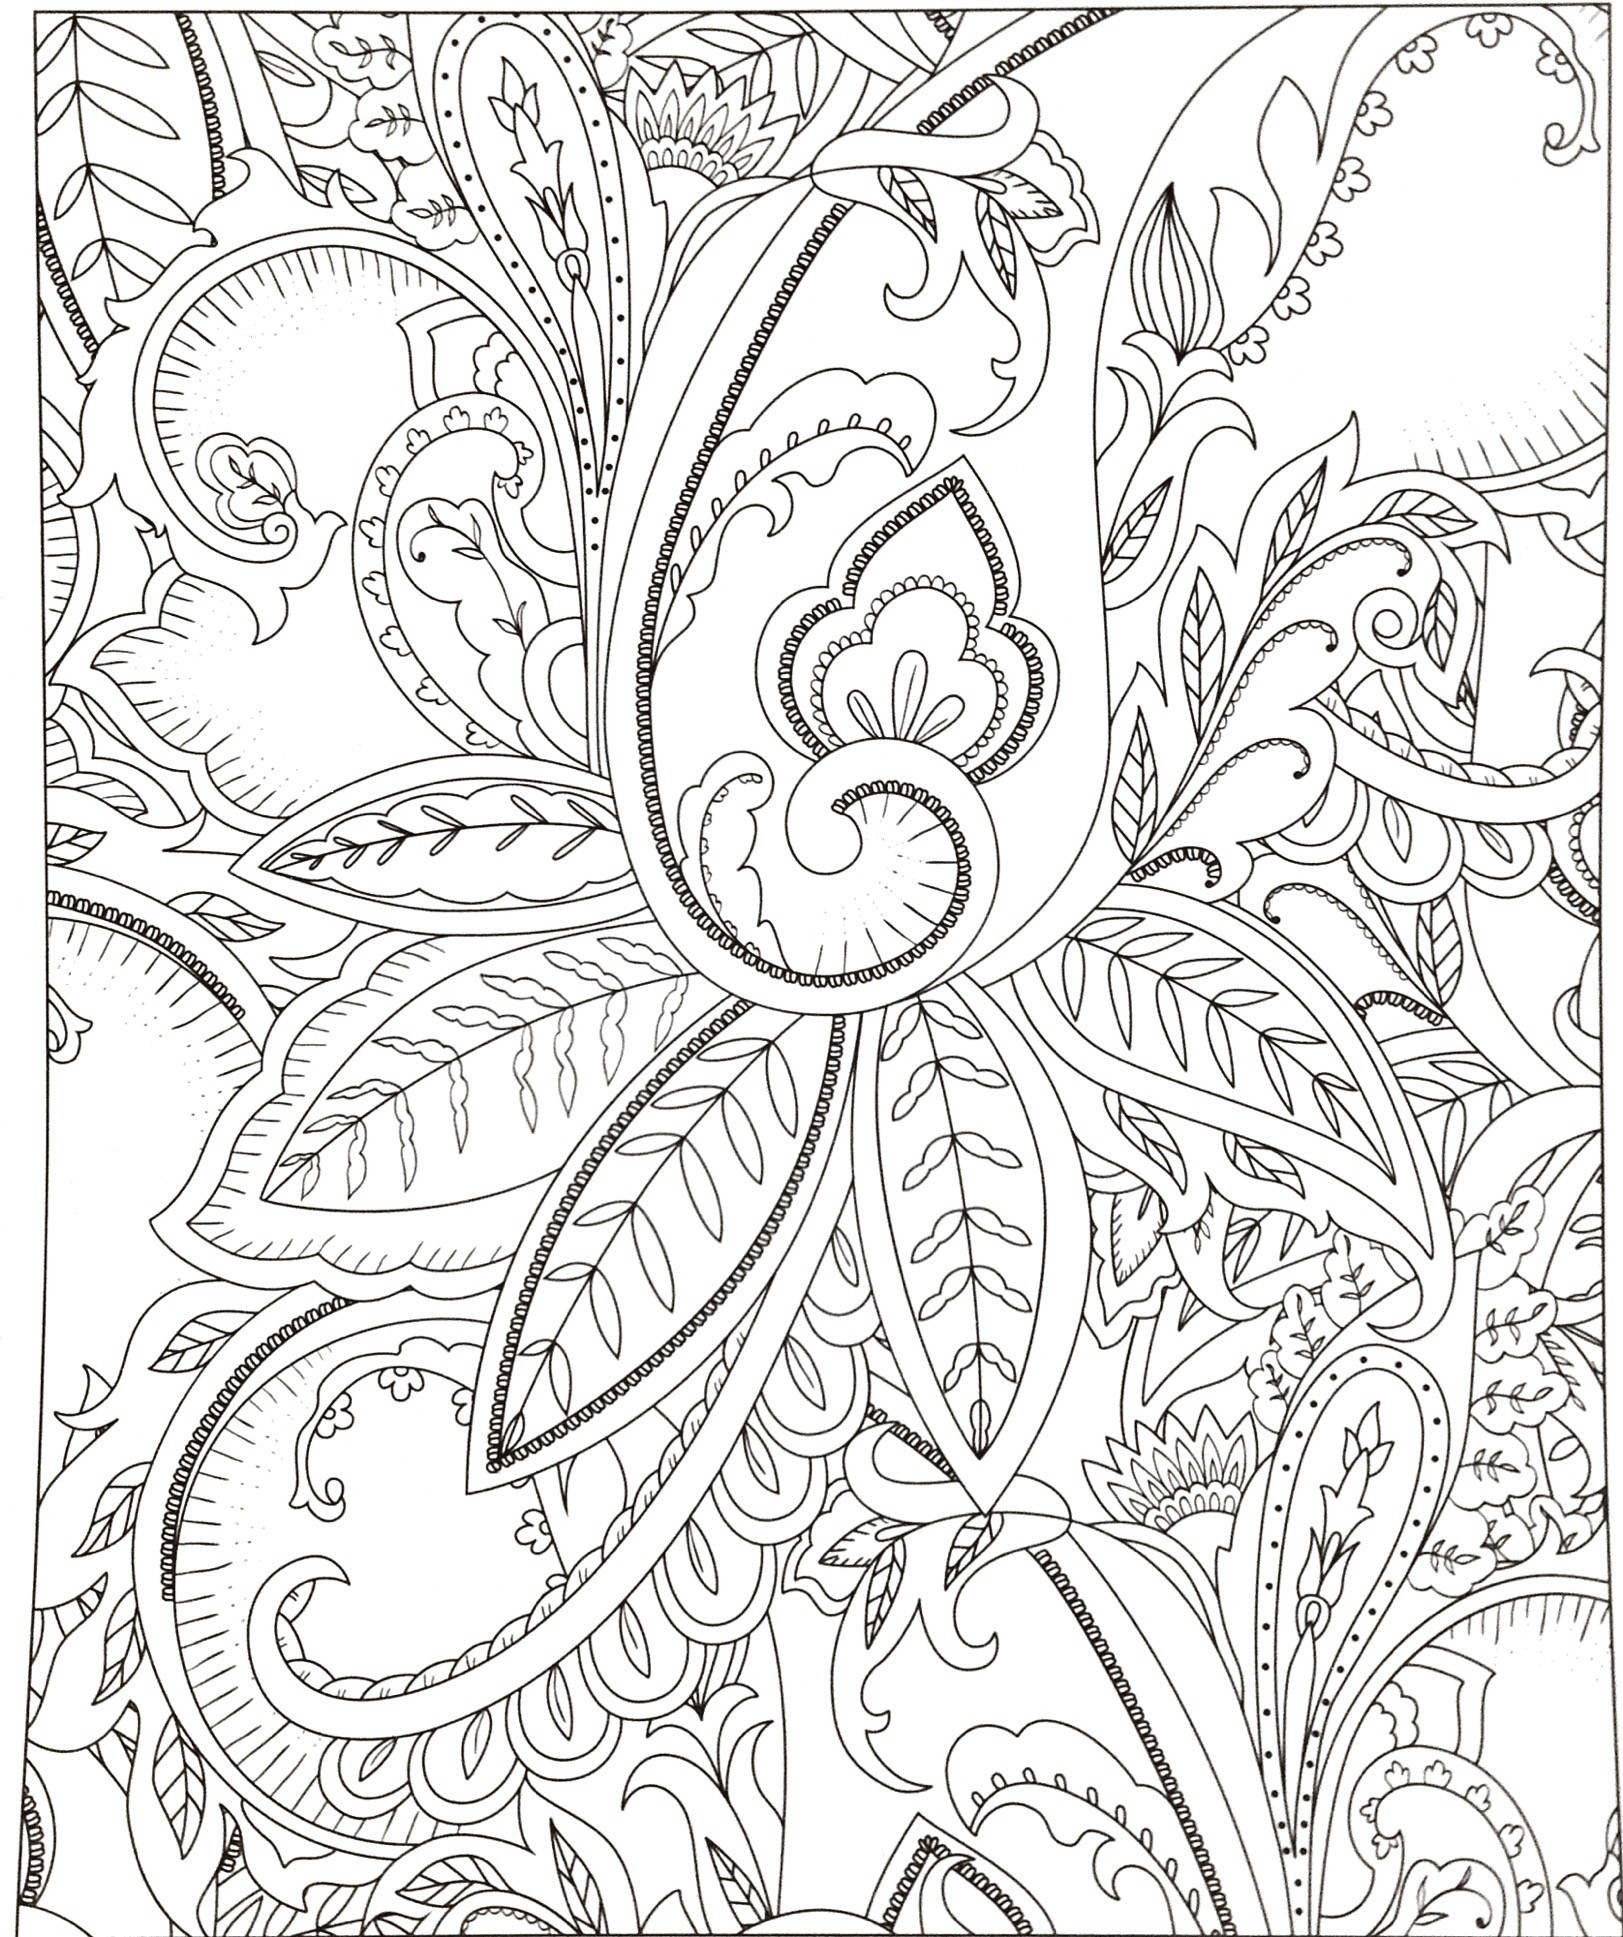 Stained Glass Vase Of Cool Vases Flower Vase Coloring Page Pages Flowers In A top I 0d for Free Printable Summer Coloring Pages Luxury Best Fresh S S Media Of Cool Vases Flower Vase Coloring